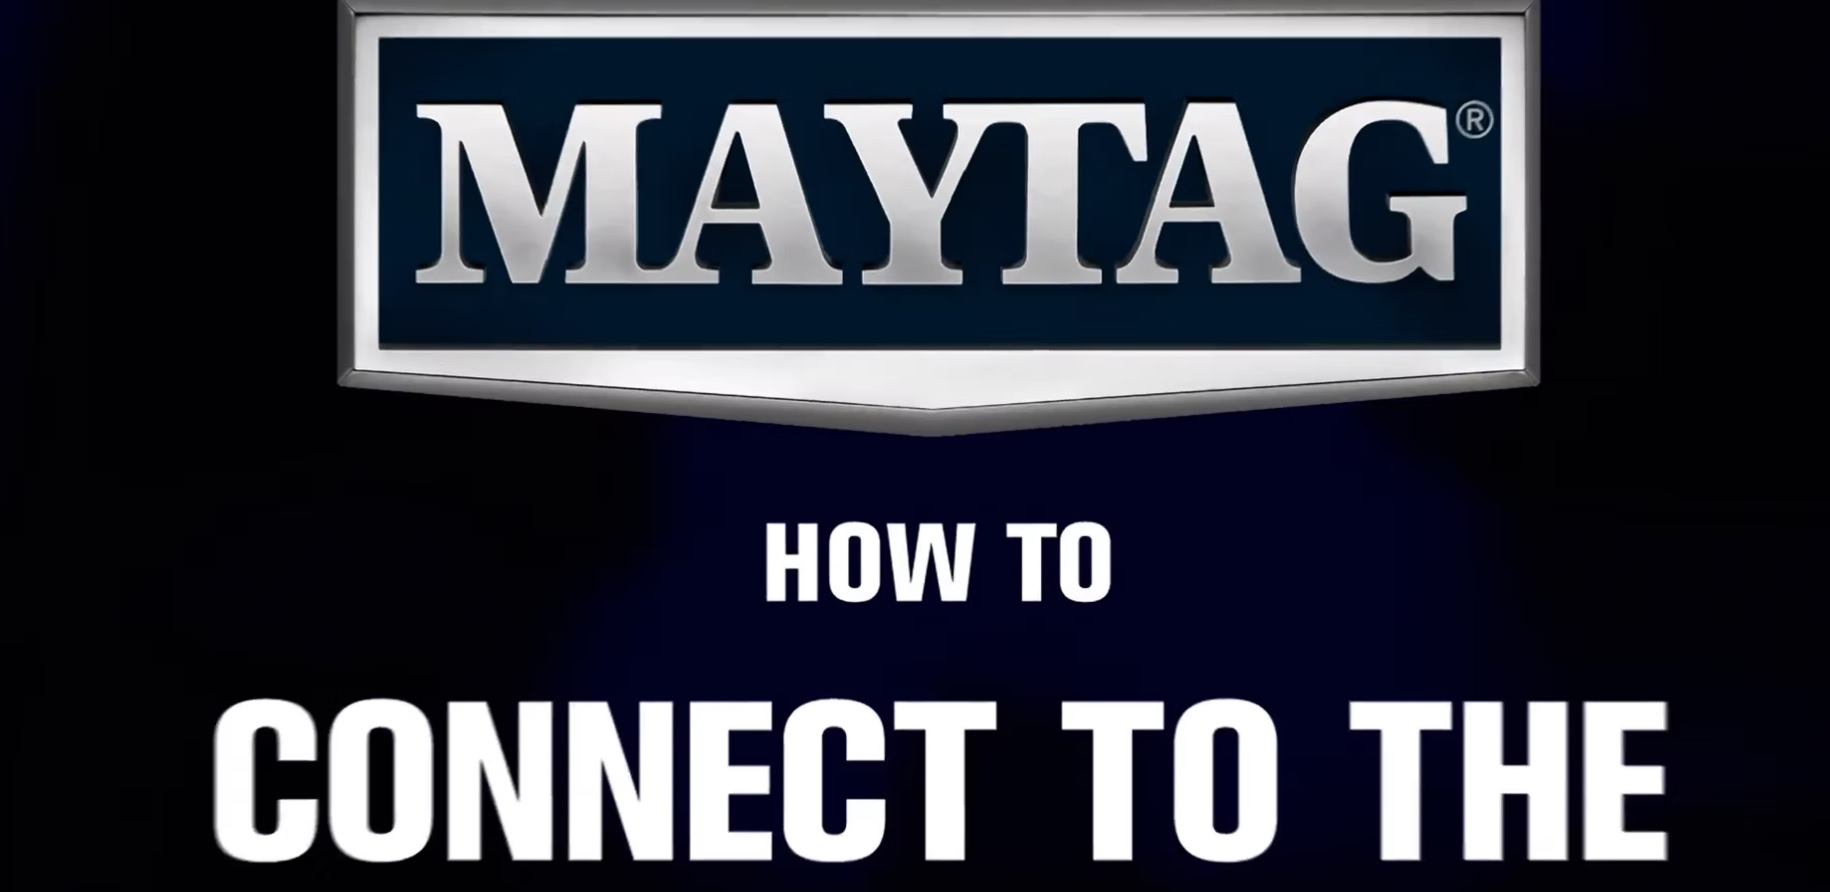 Seamlessly pair your SMART appliance to the Maytag® App with these simple steps to help you tackle your laundry.